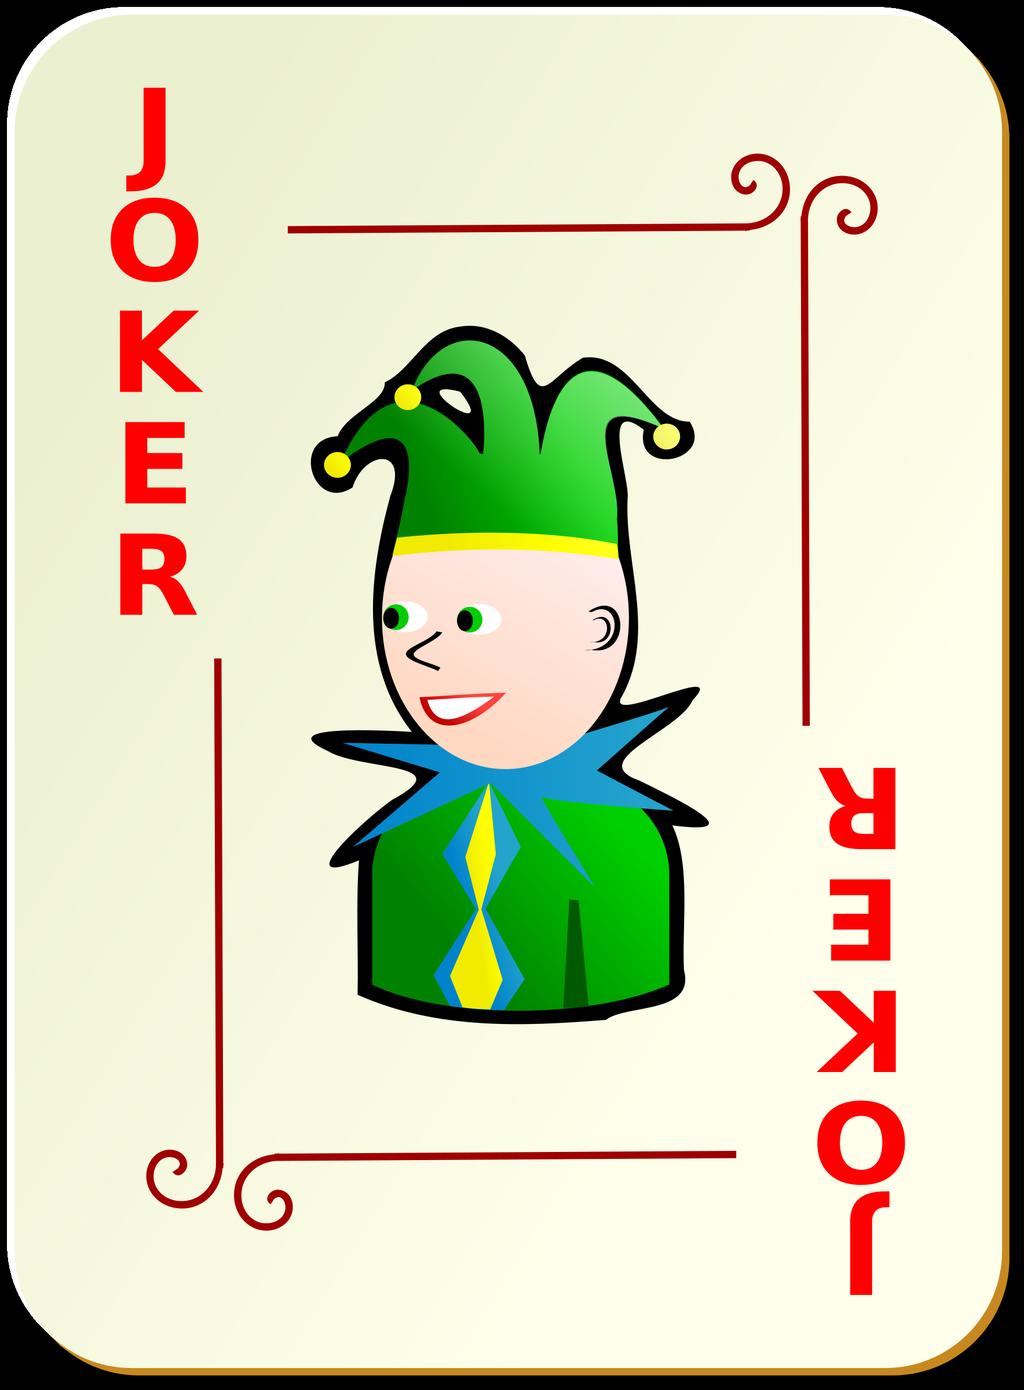 12. After each time they go through the deck, the cards will always be in the same order If they go through the deck an even number of times the cards will be in the regular order, 3, 5, 7, 6, 8, 9,